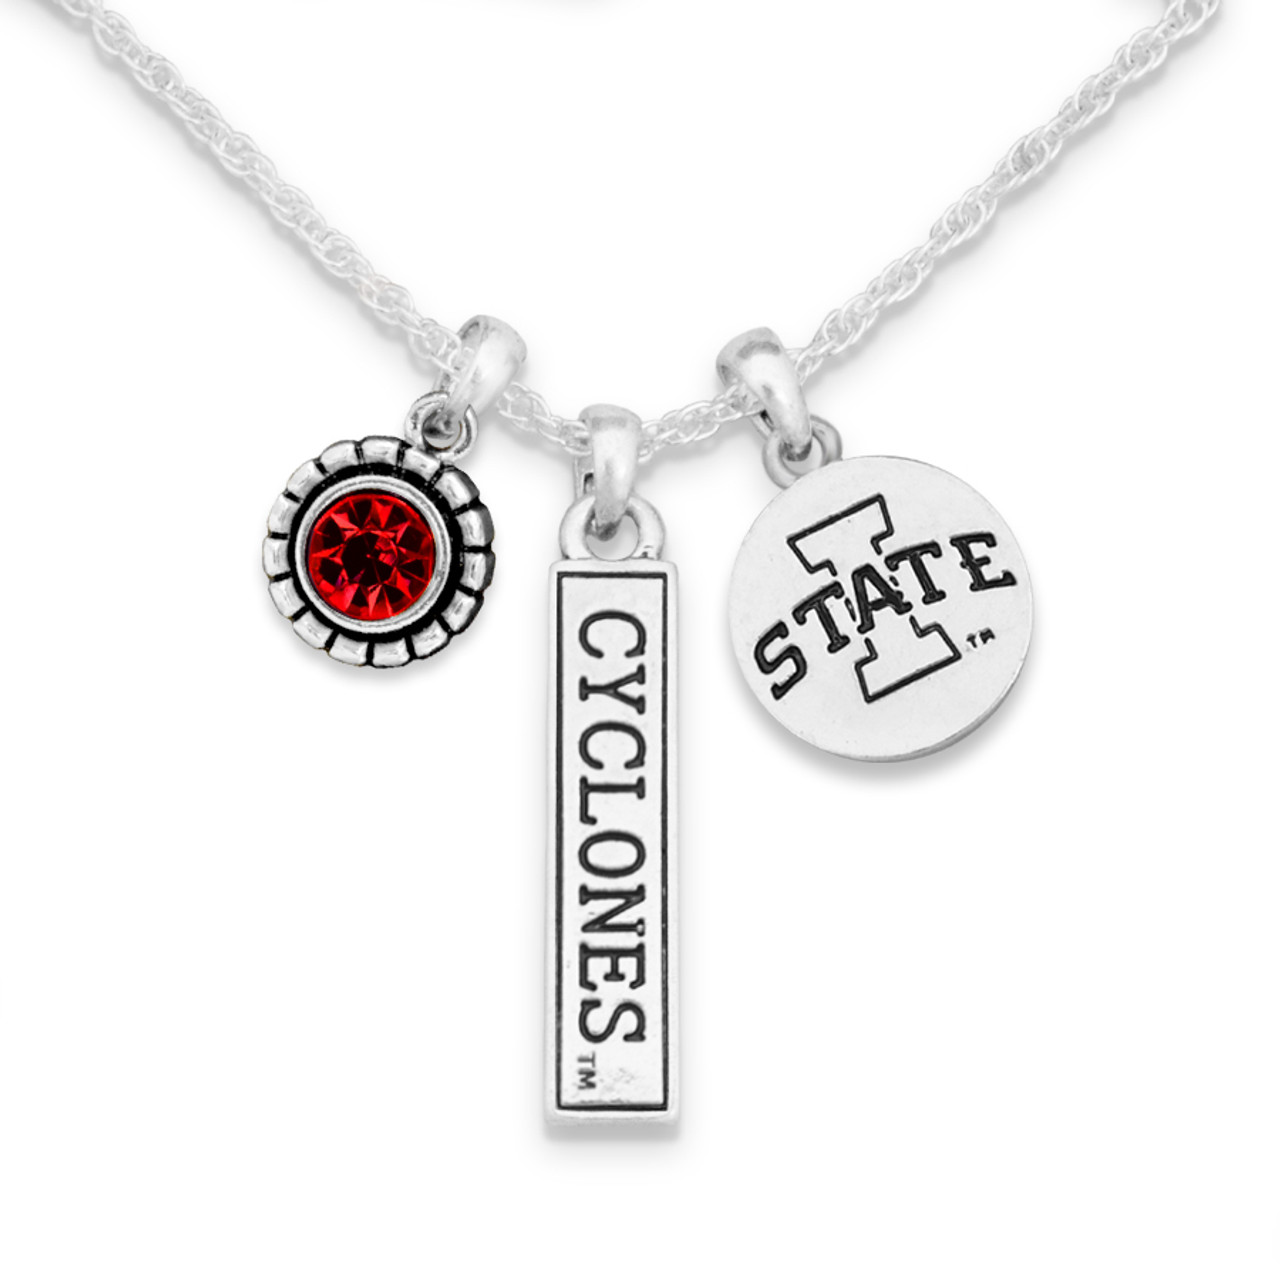 *Choose Your College* Necklace - Trifecta